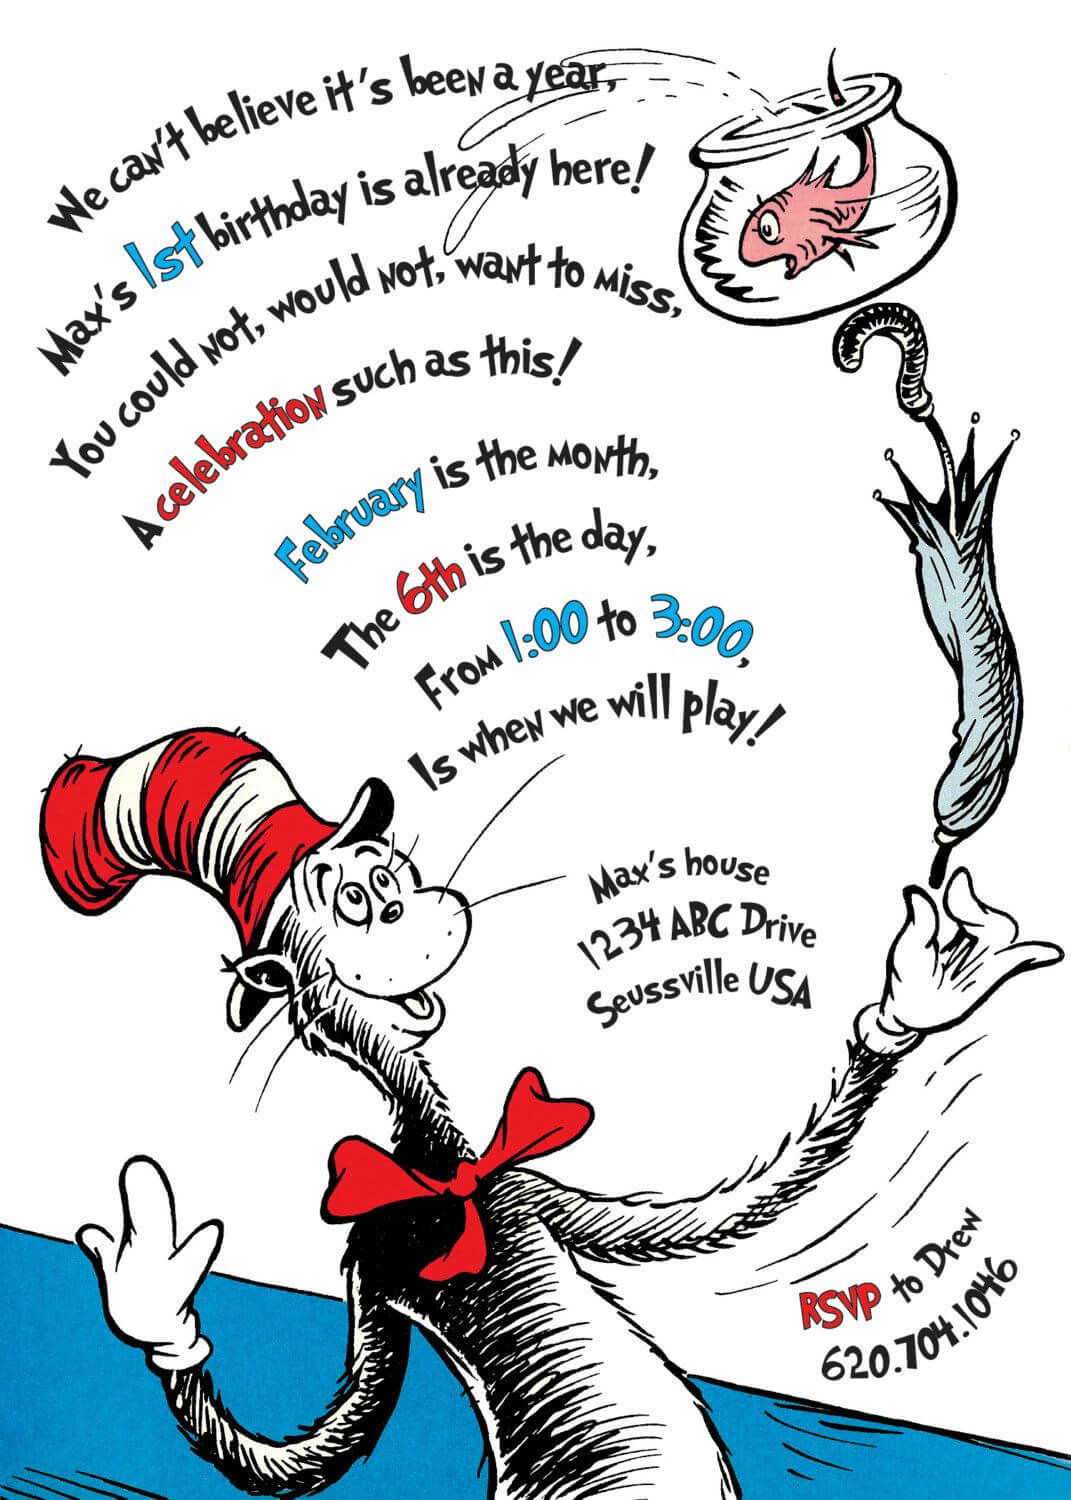 The Cat In The Hat Birthday Invitation. Printable | Dr Seuss Intended For Dr Seuss Birthday Card Template